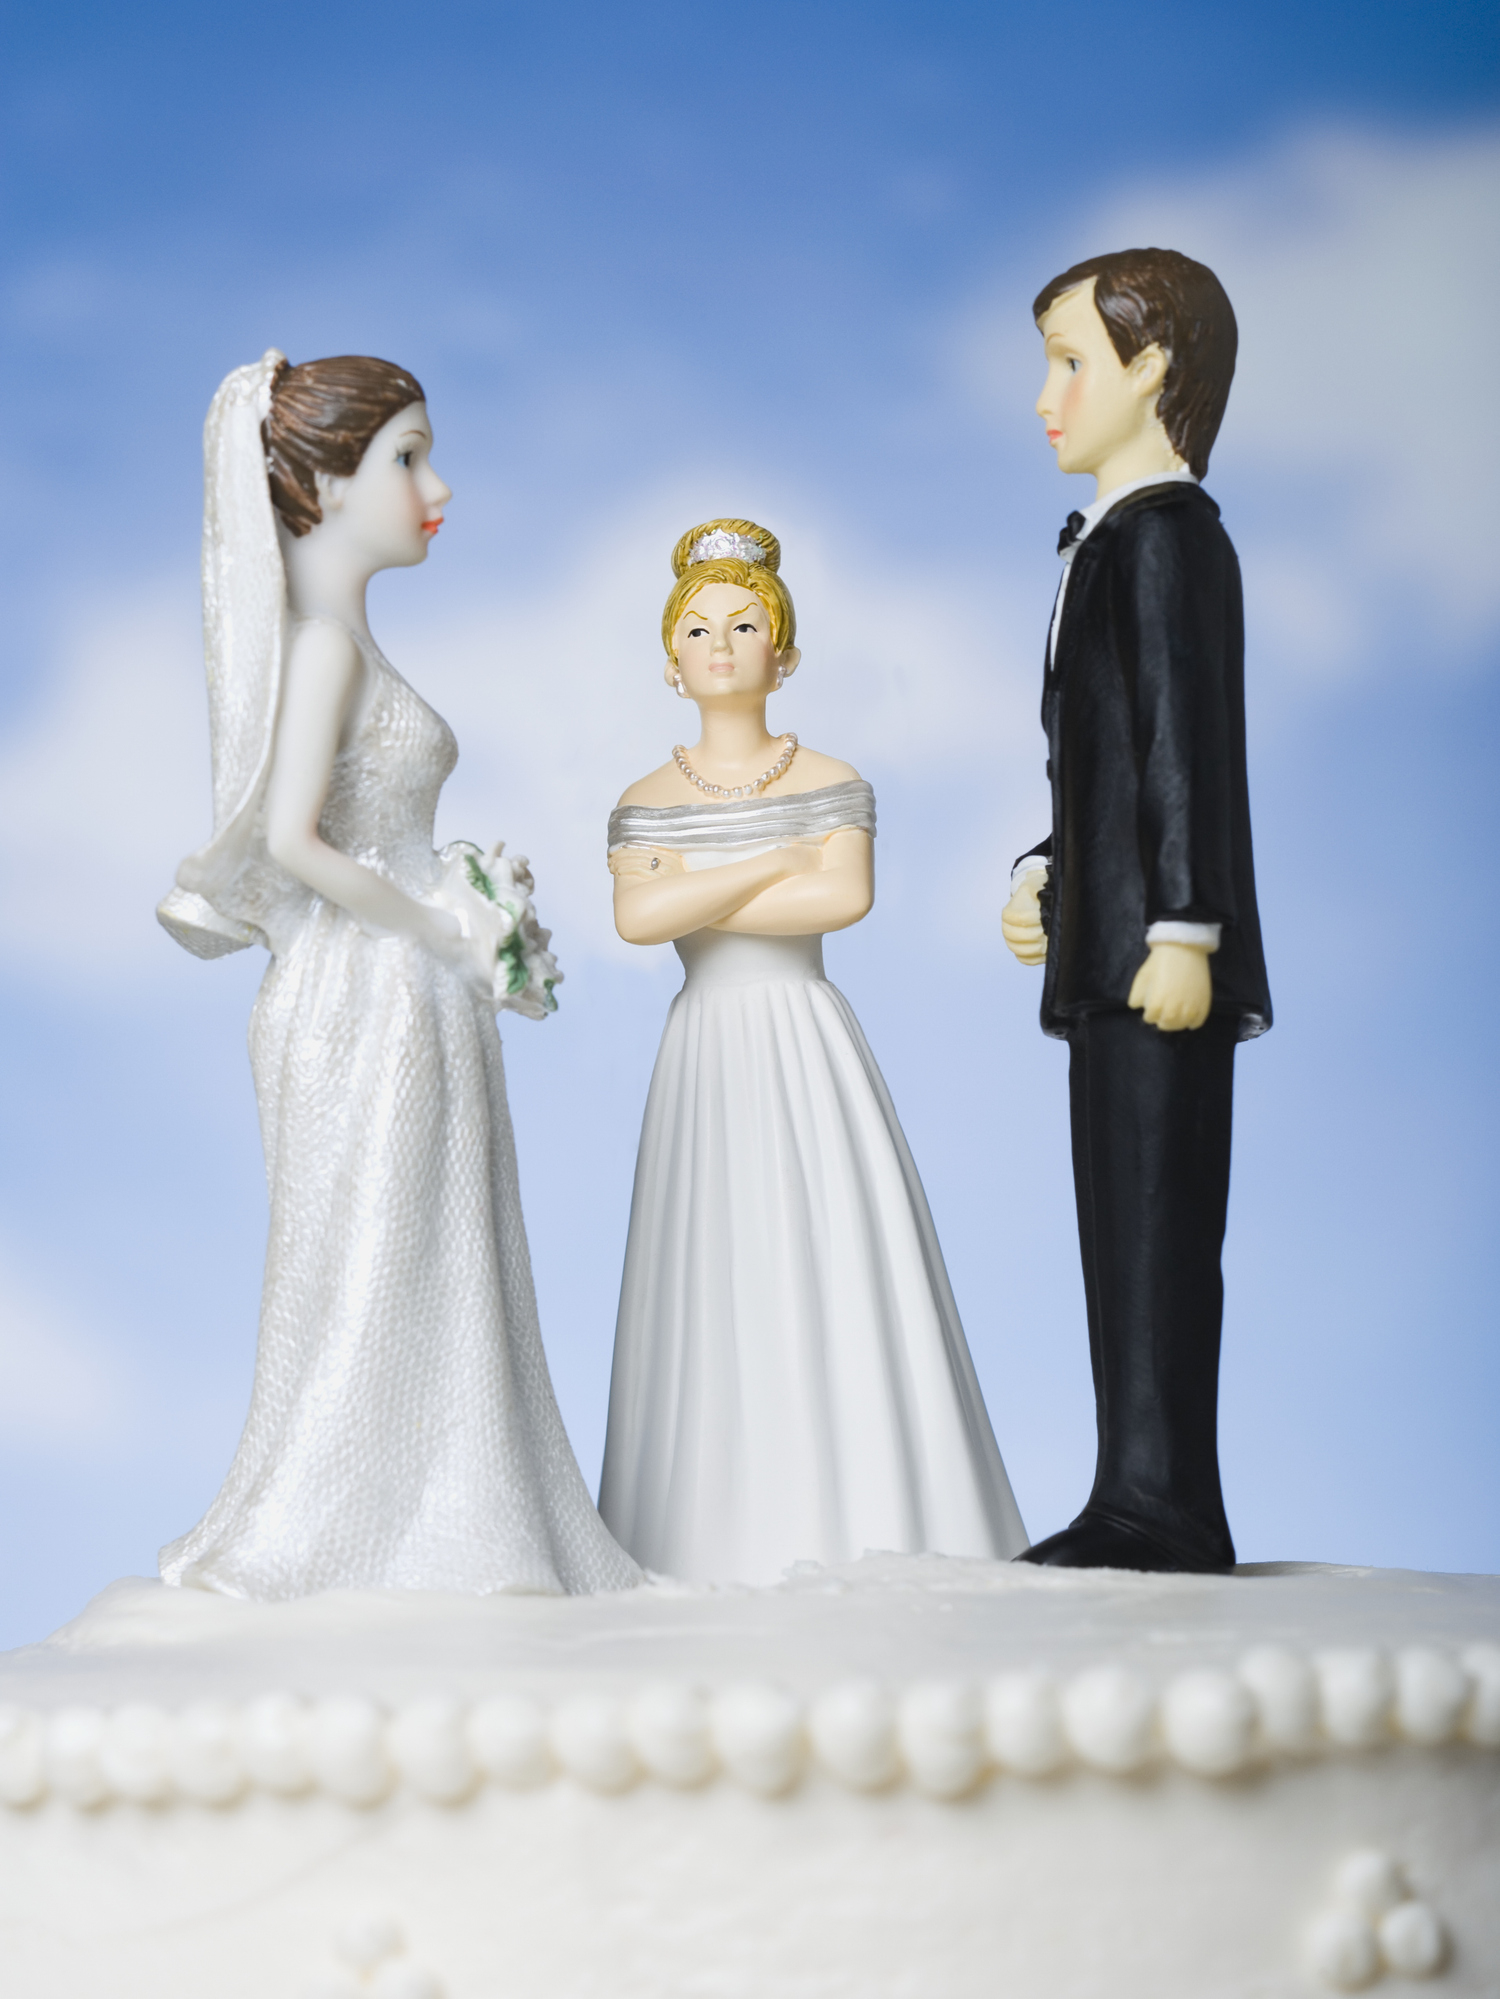 Bride and groom figurines on a wedding cake with a disapproving third figure between them